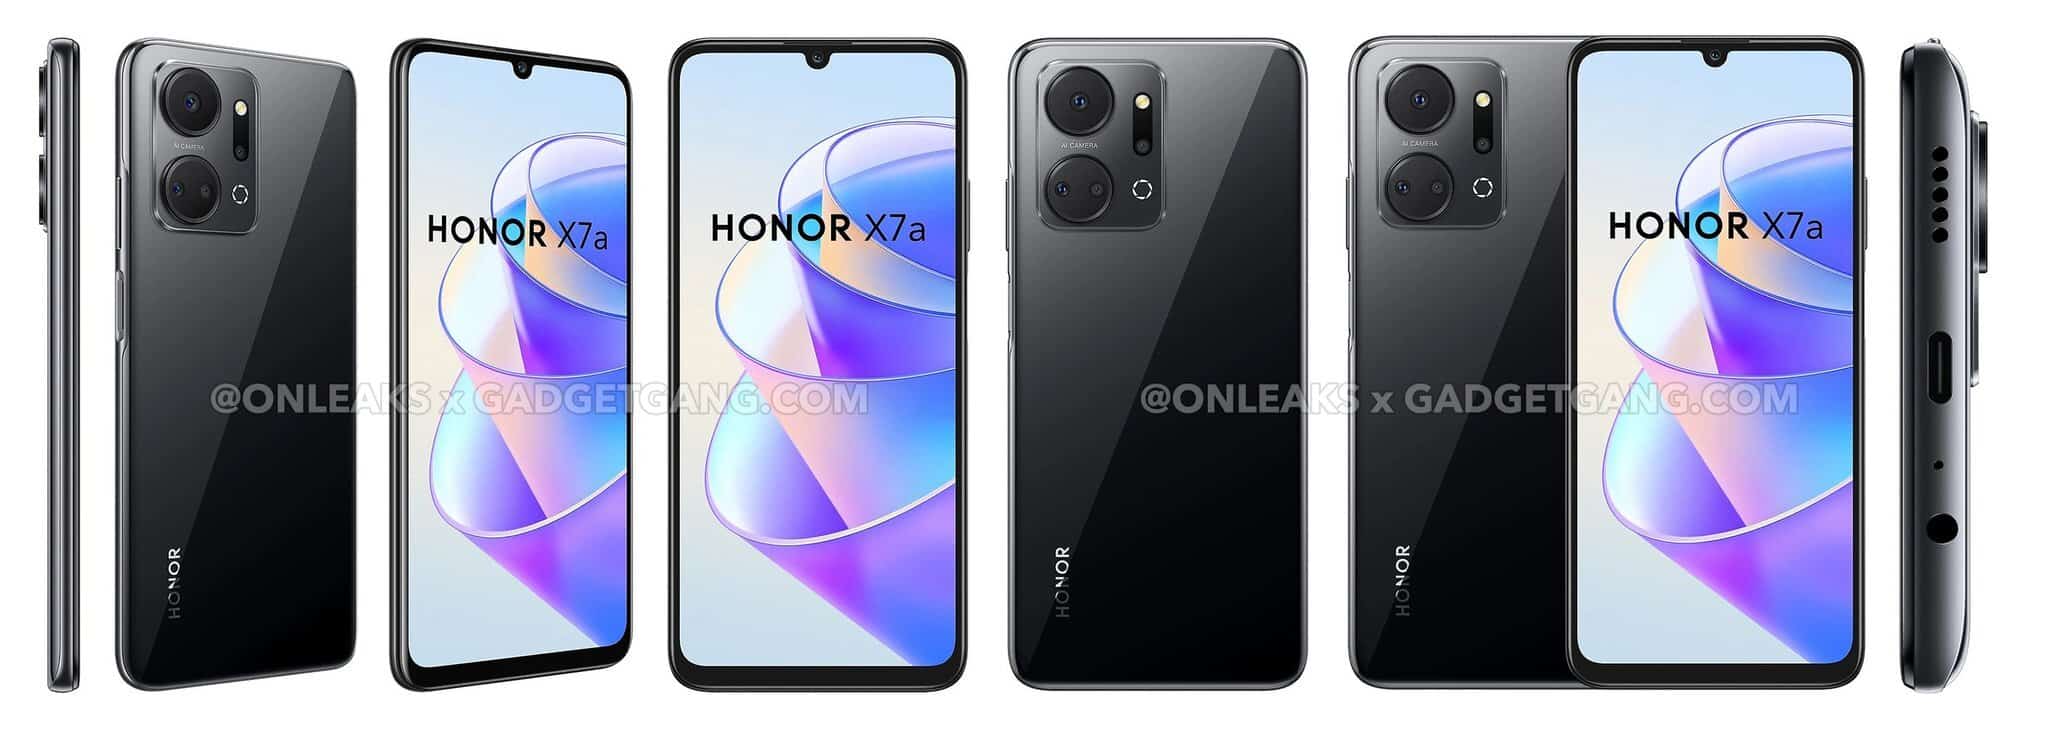 EXCLUSIVE: Honor X7a Specifications and Images Revealed